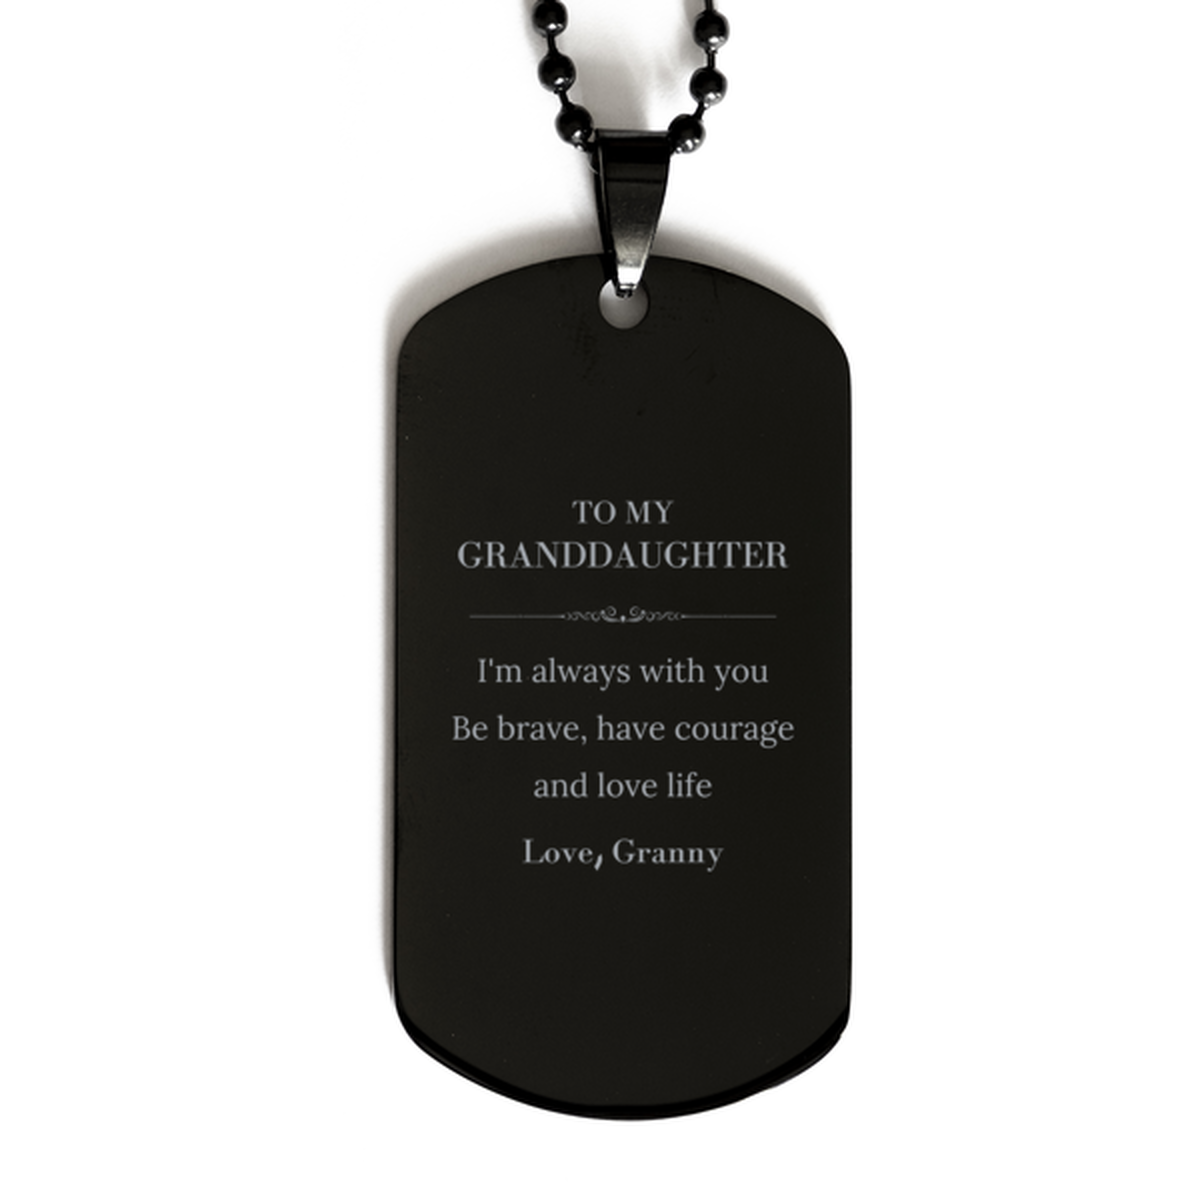 To My Granddaughter Gifts from Granny, Unique Black Dog Tag Inspirational Christmas Birthday Graduation Gifts for Granddaughter I'm always with you. Be brave, have courage and love life. Love, Granny